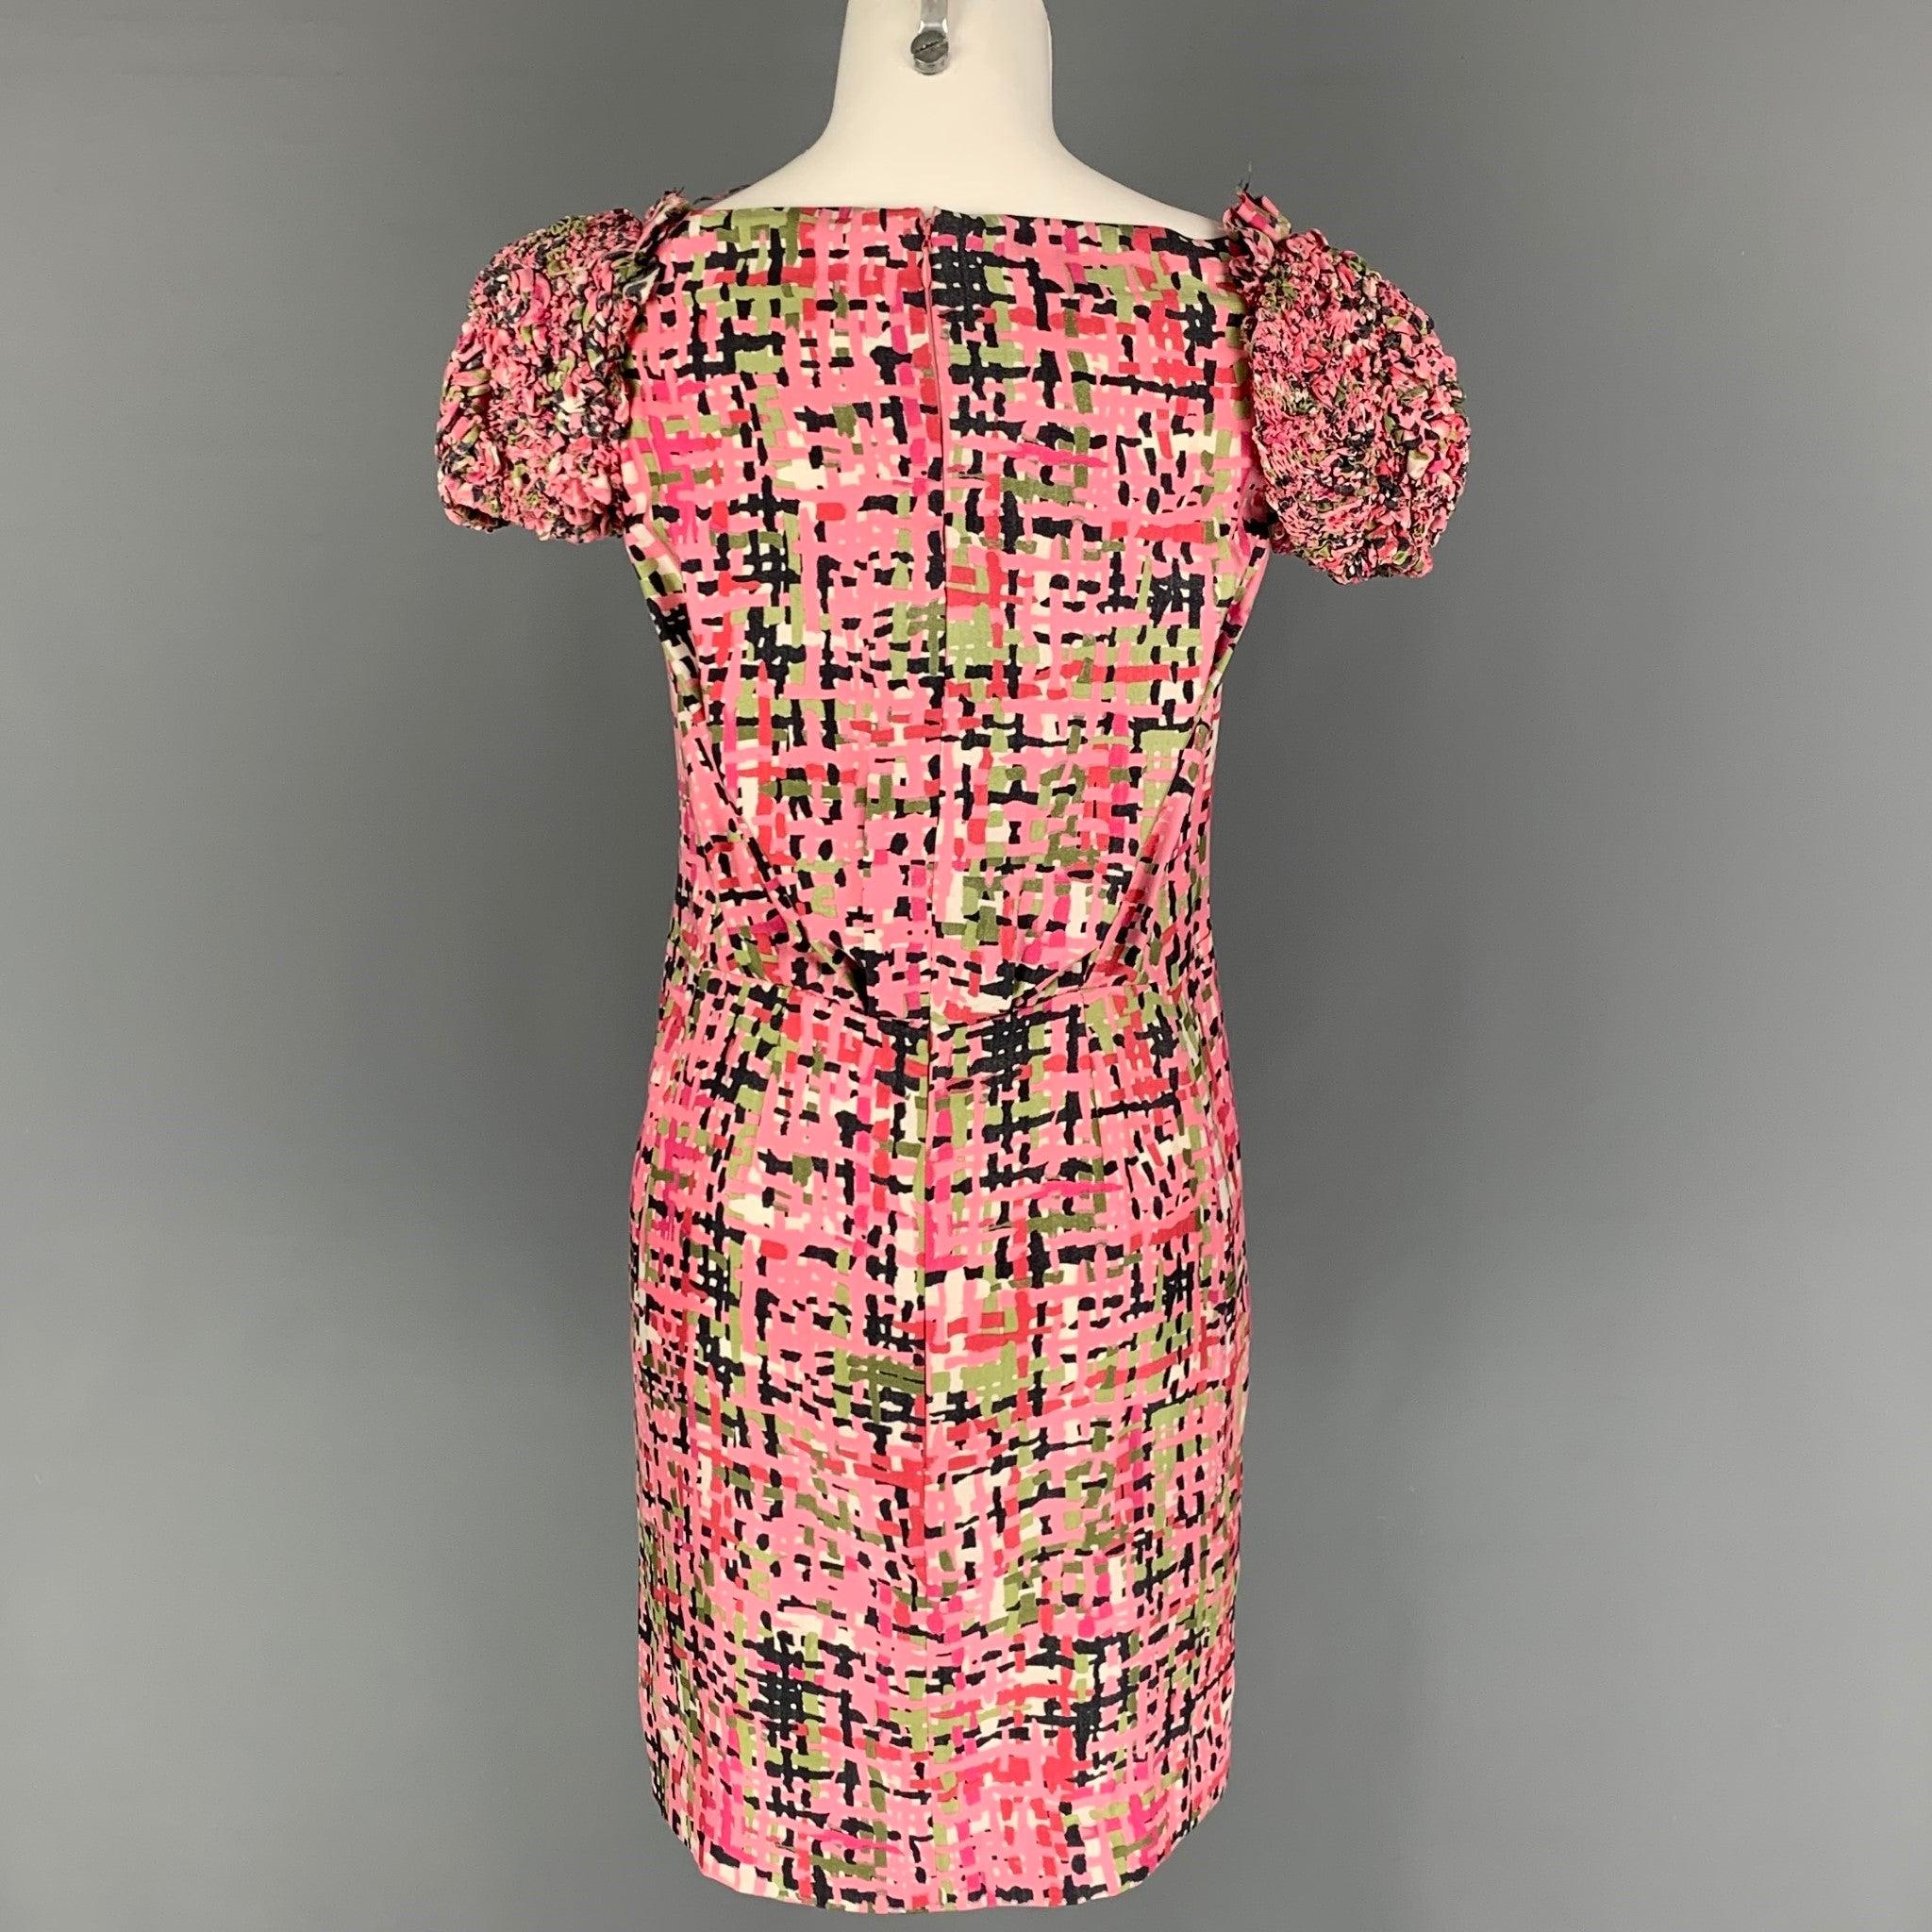 YVES SAINT LAURENT Size S Pink Green Black Abstract Short Sleeve Dress In Good Condition For Sale In San Francisco, CA